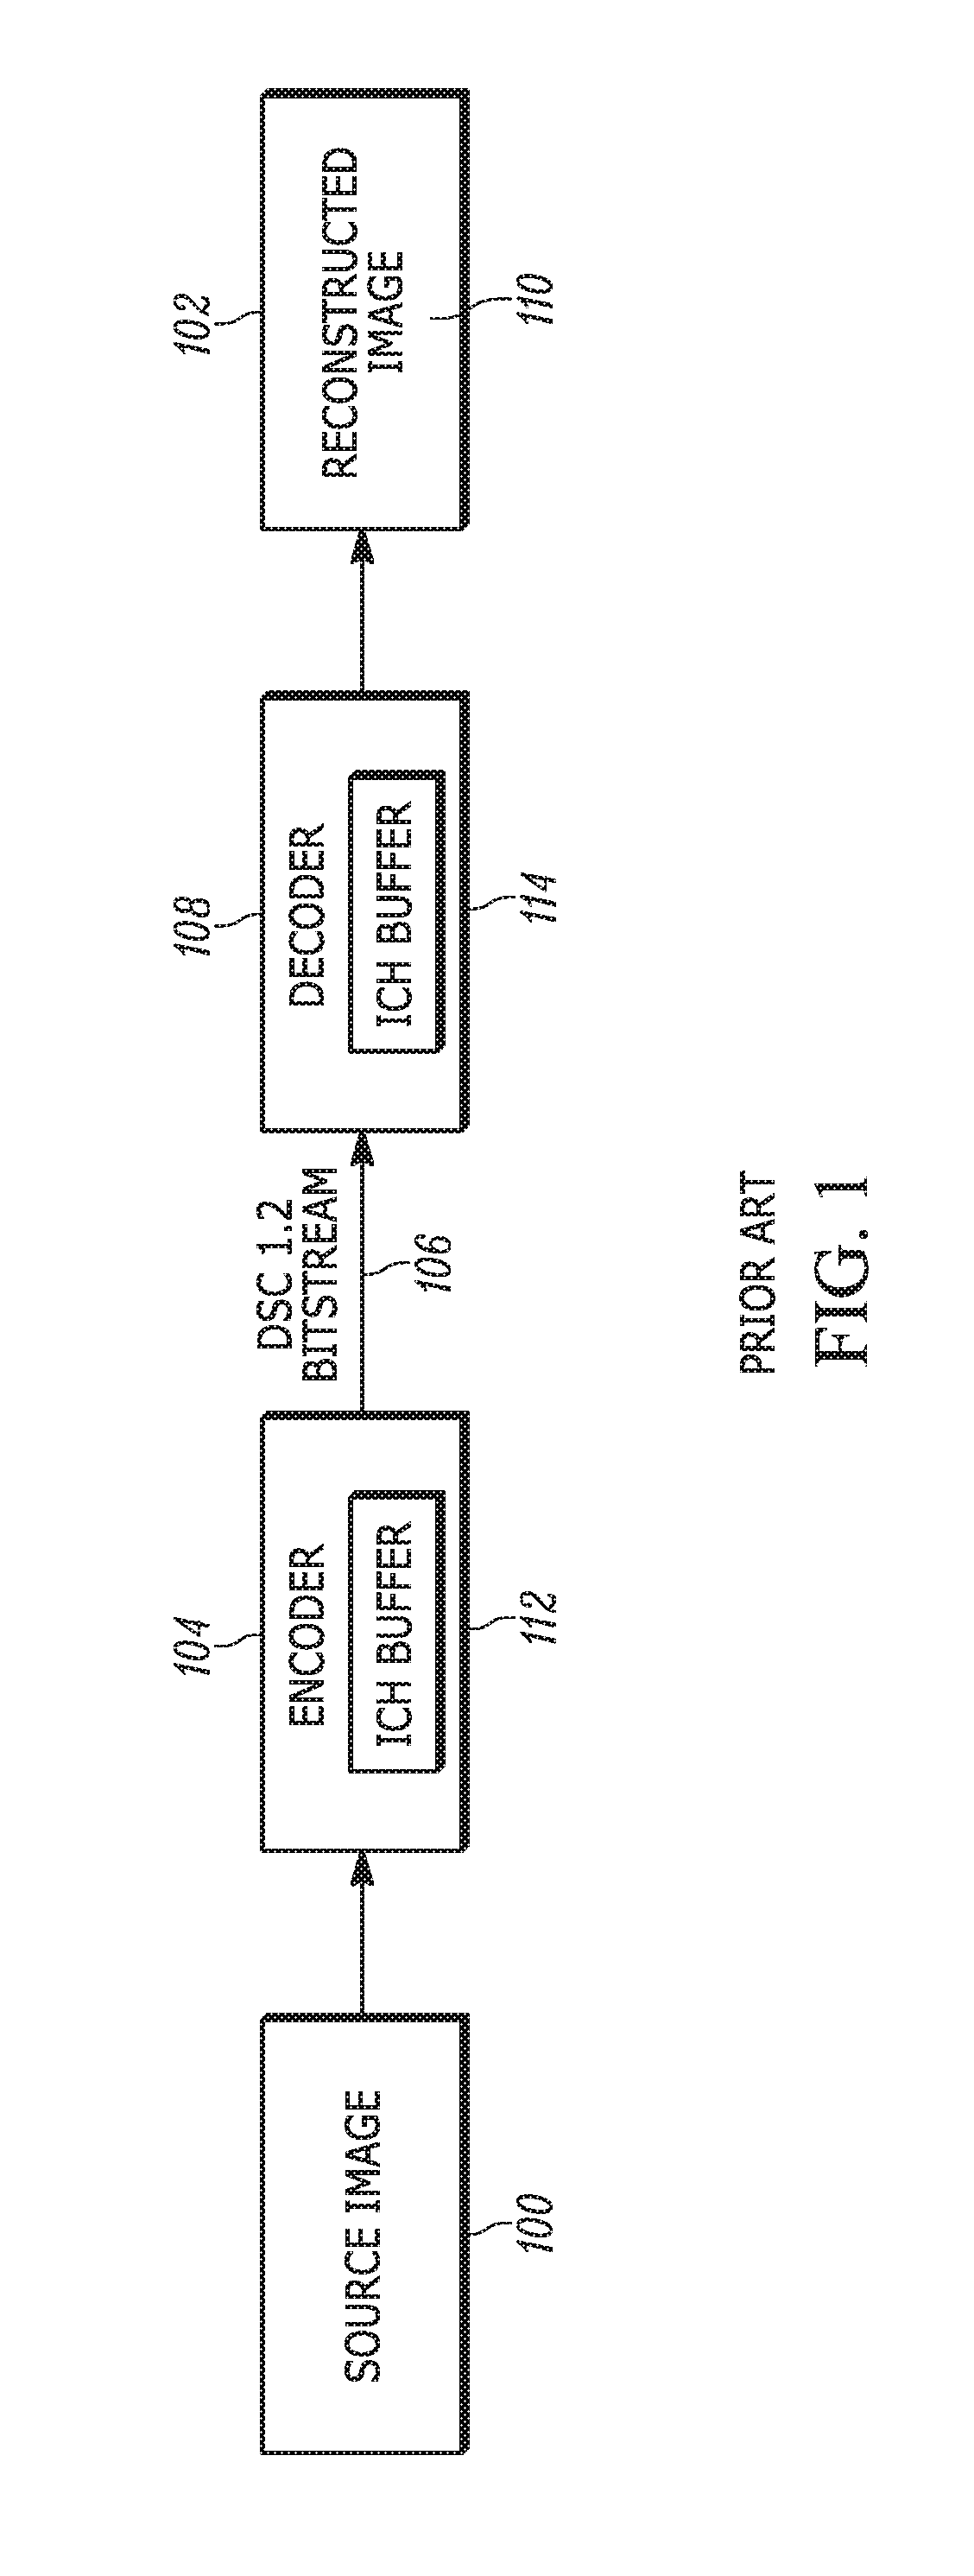 Method and apparatus for image compression that employs multiple index color history buffers